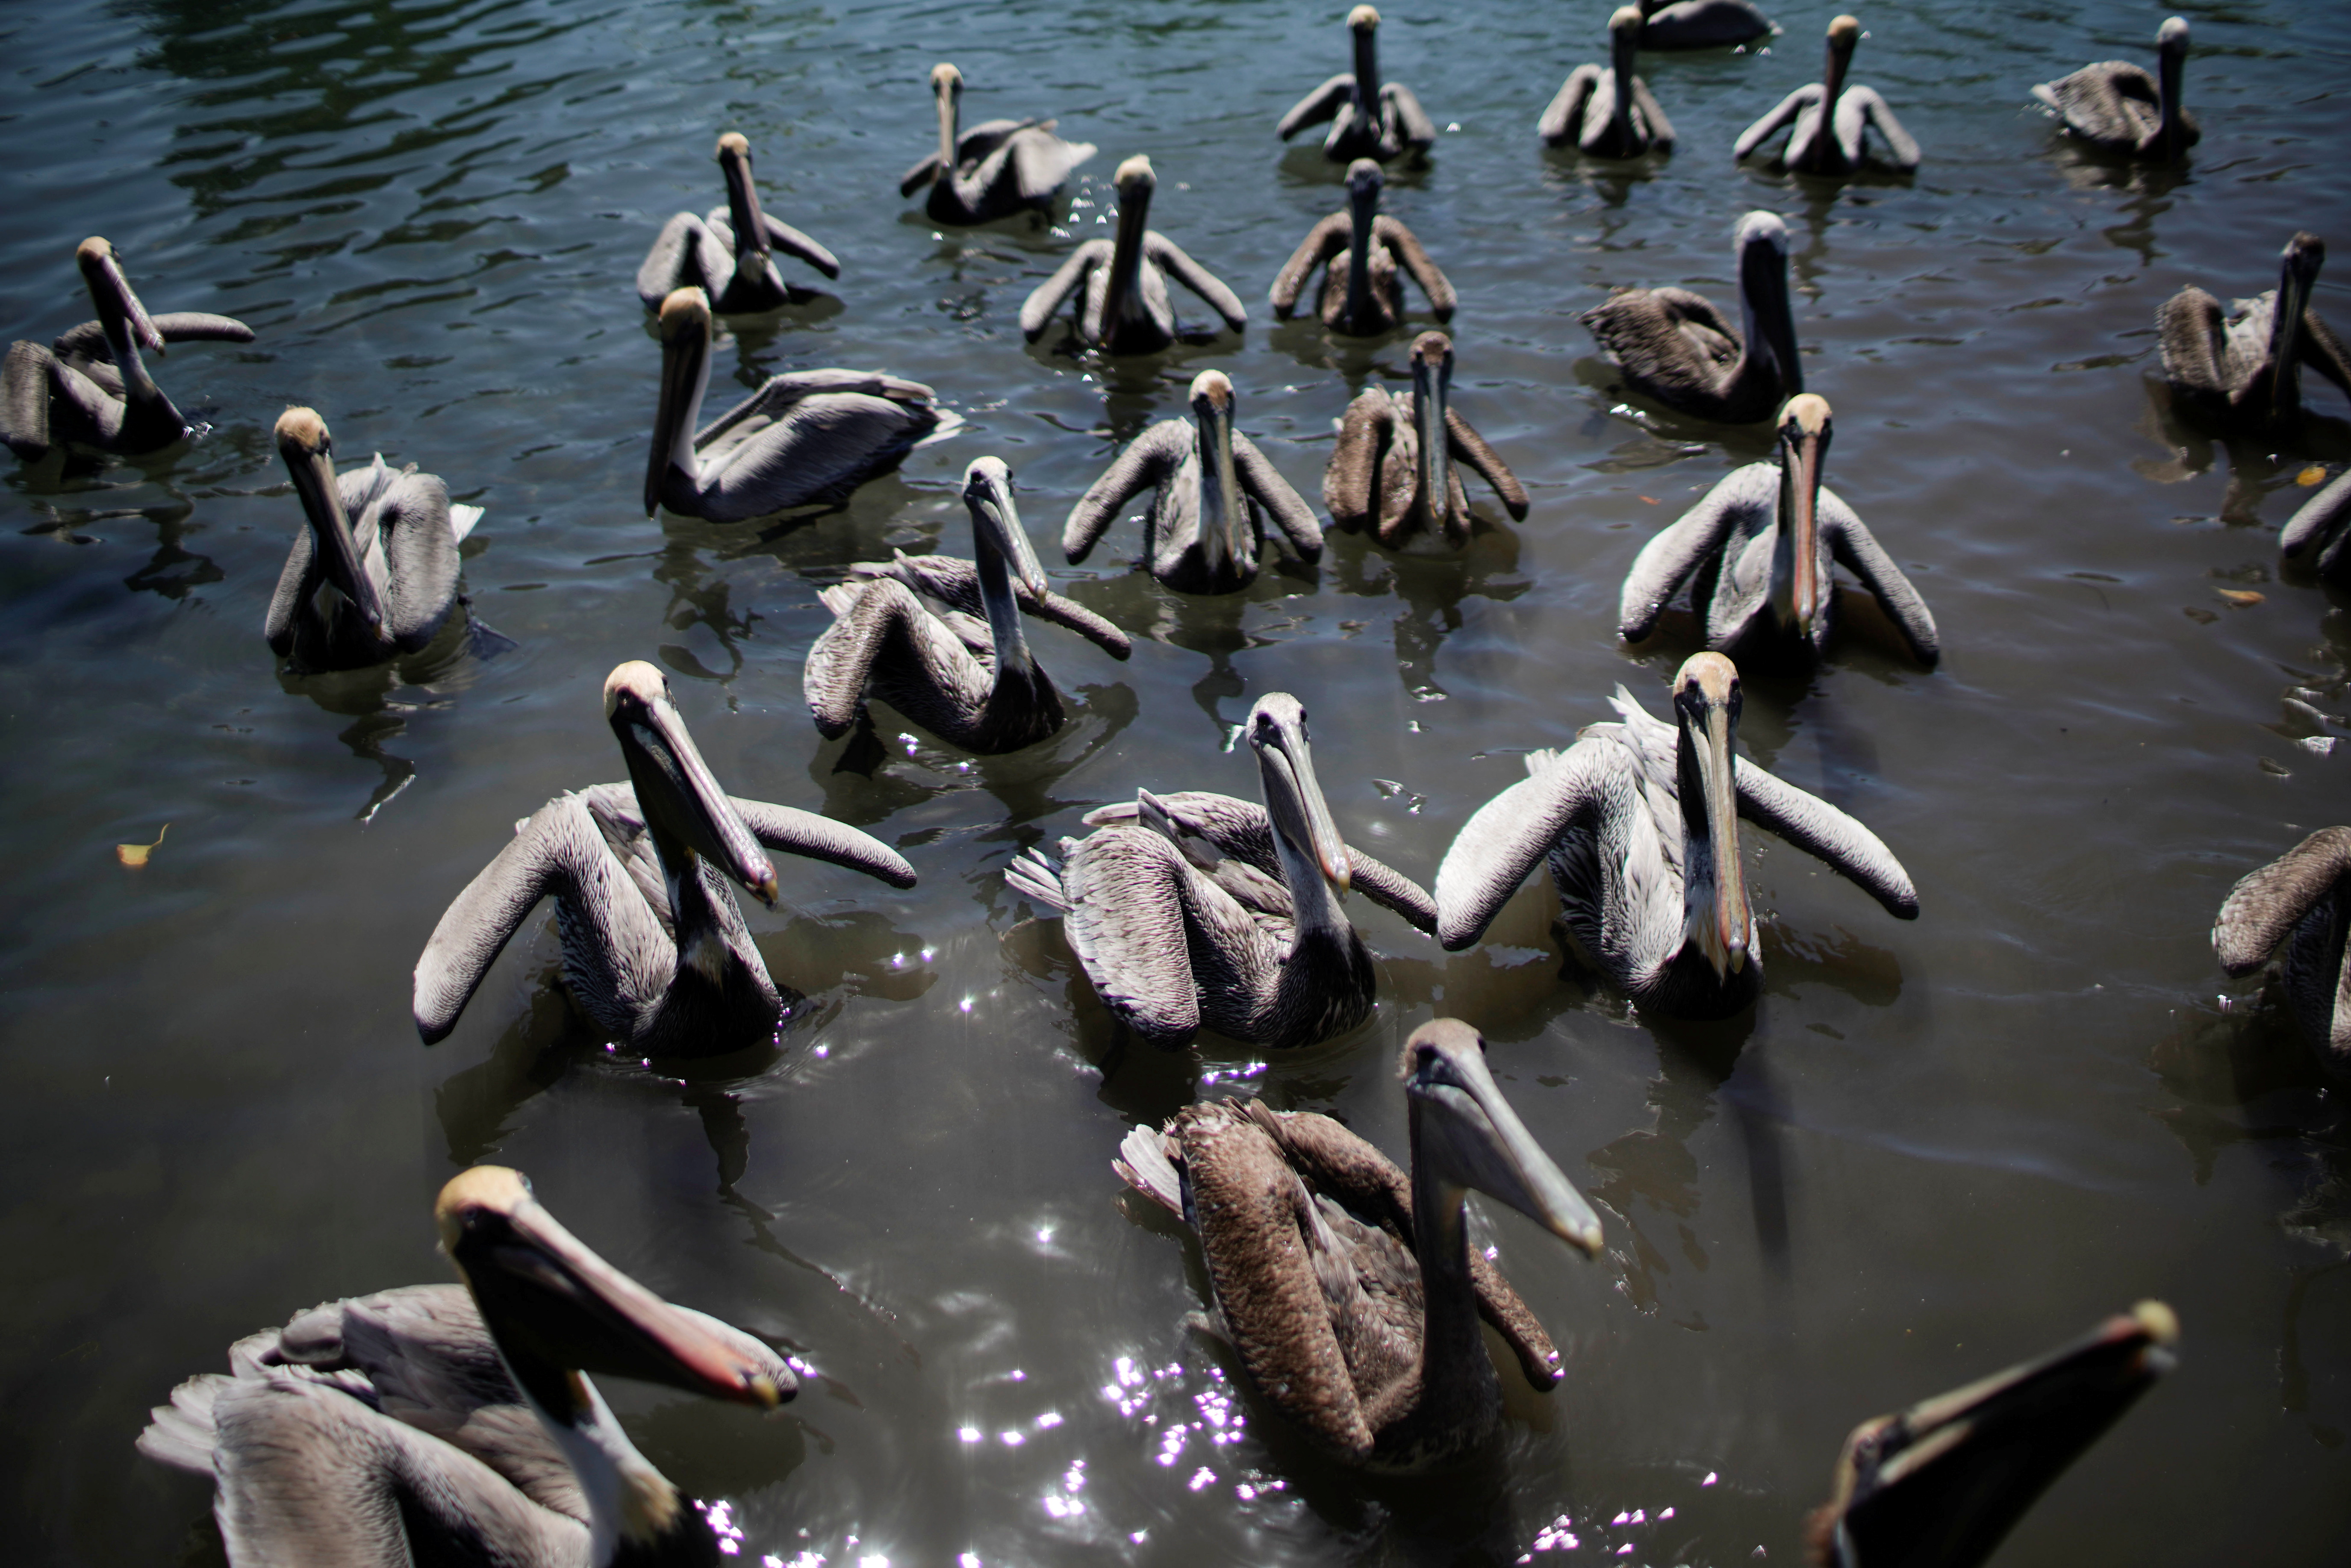 Pelicans wait to be fed by Leonardo Carrillo (not pictured)  in Guanimar, Cuba